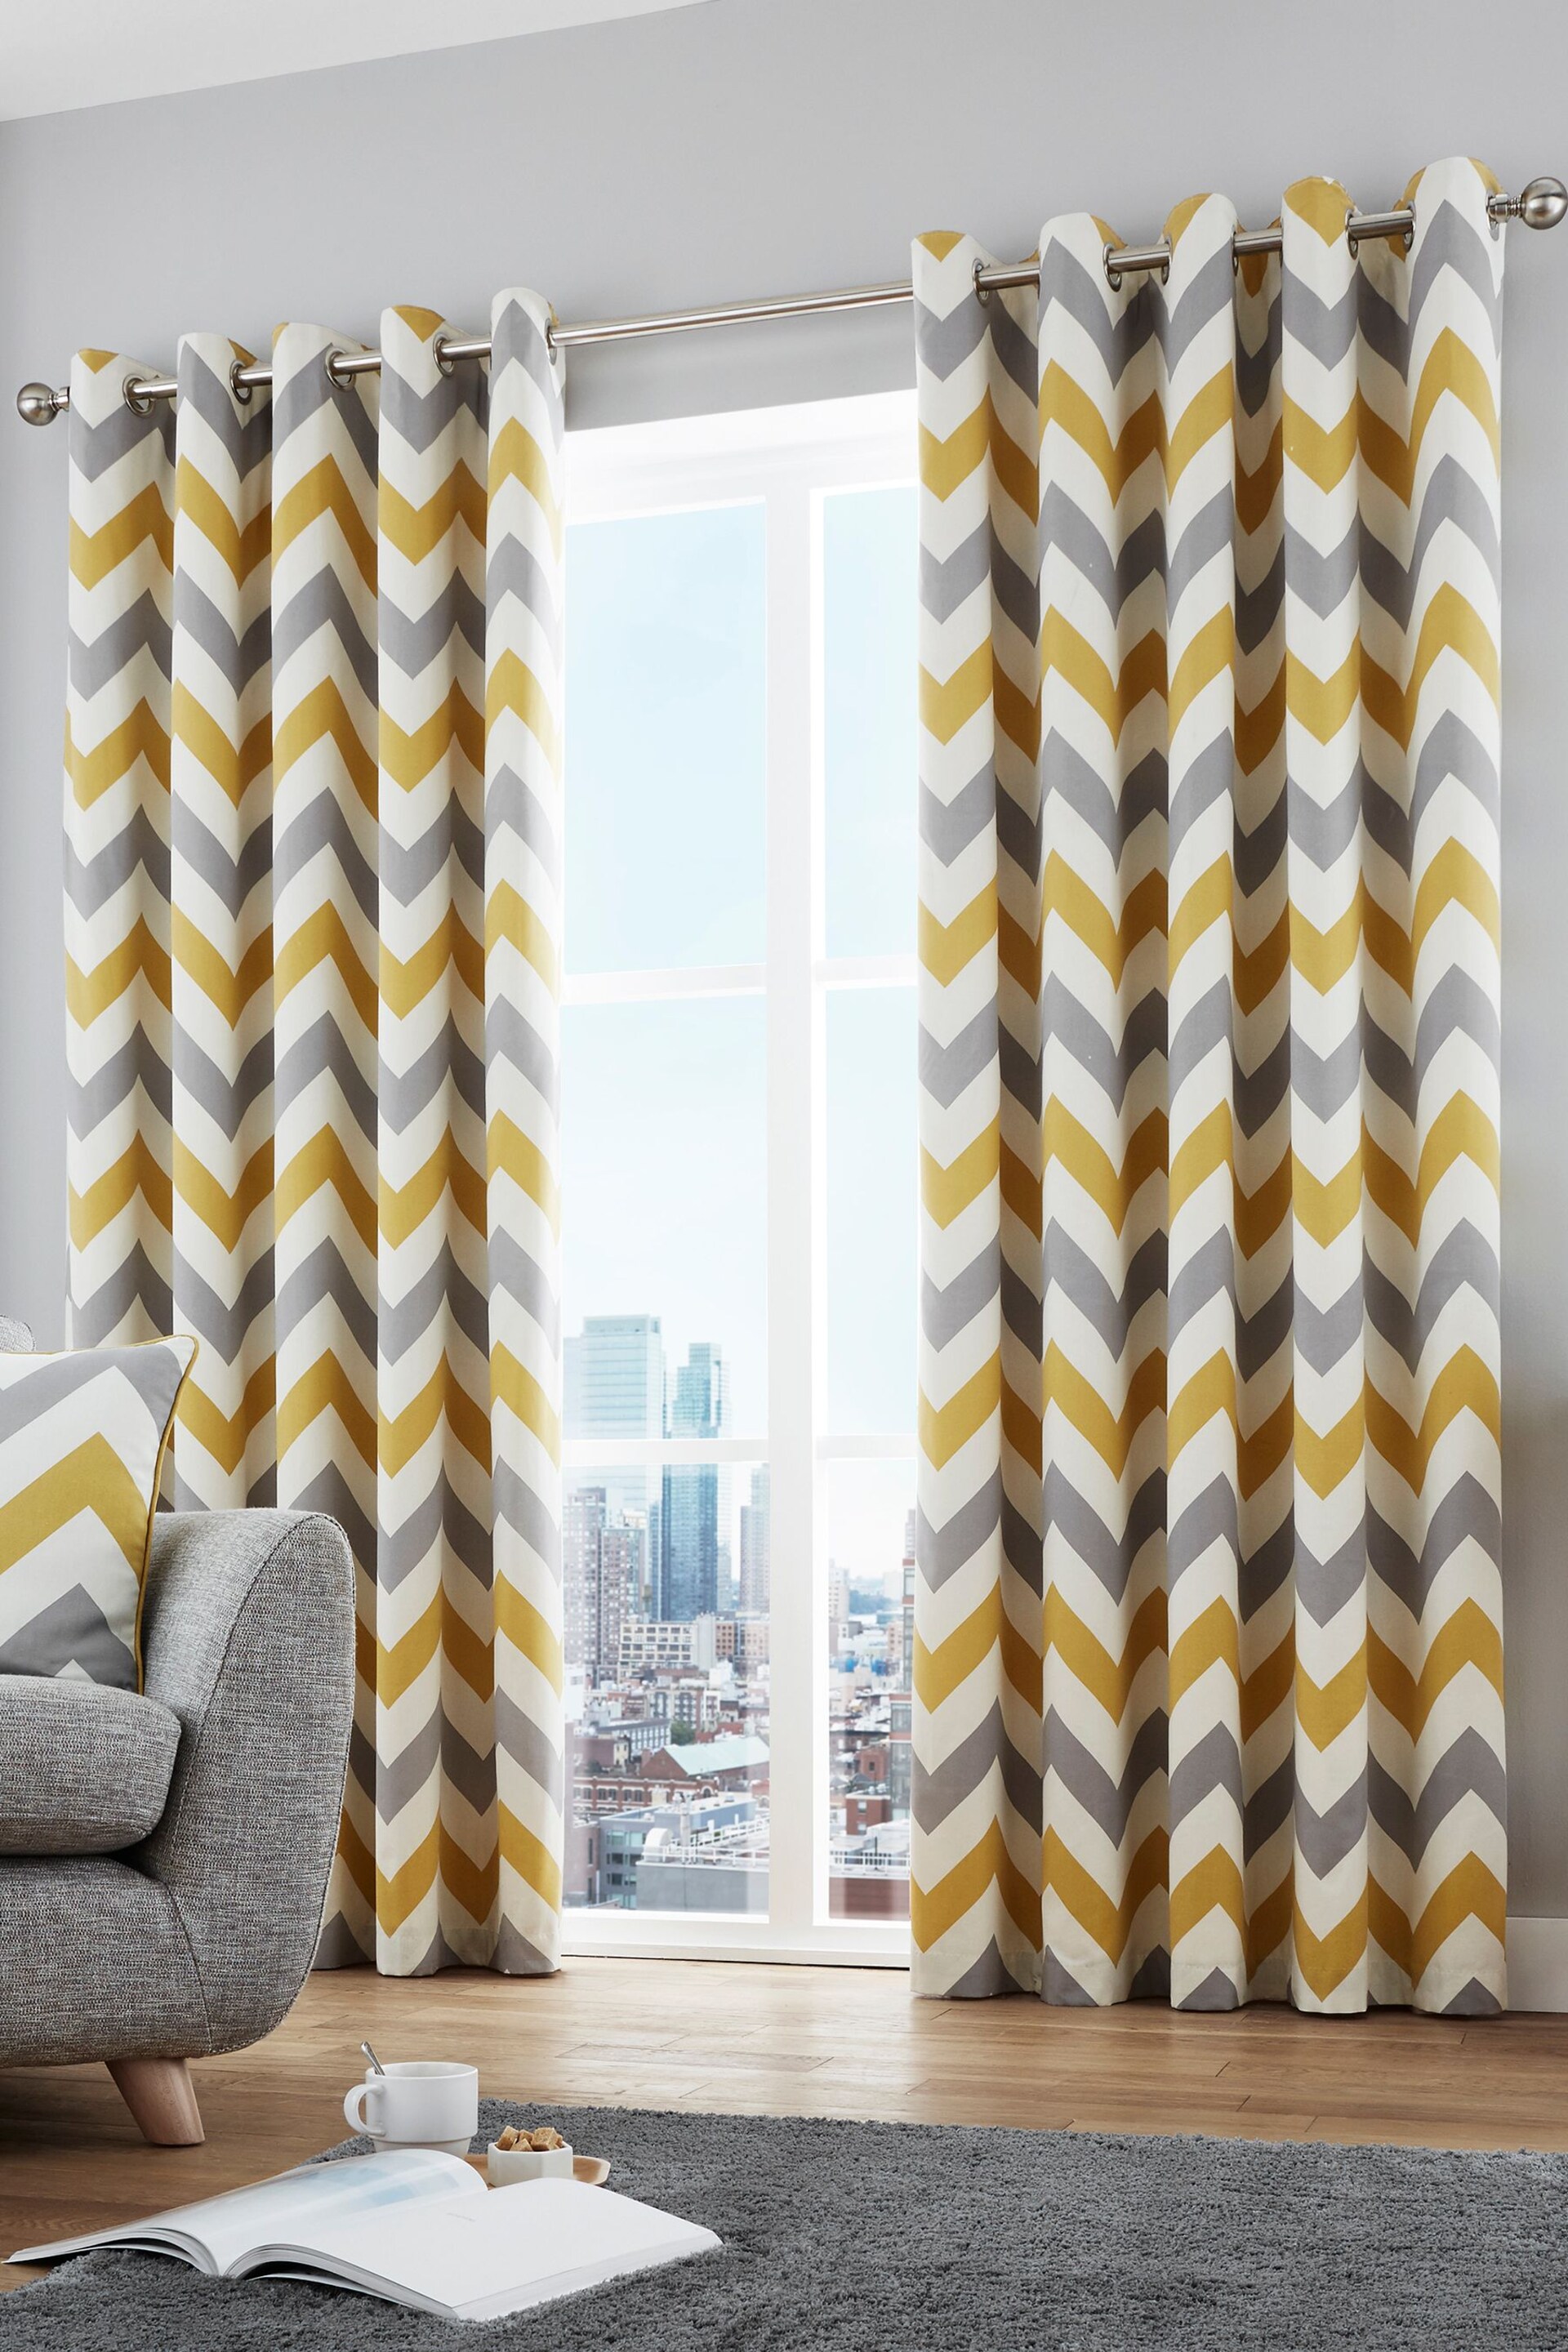 Fusion Ochre Yellow Chevron Geo Lined Eyelet Curtains - Image 1 of 3